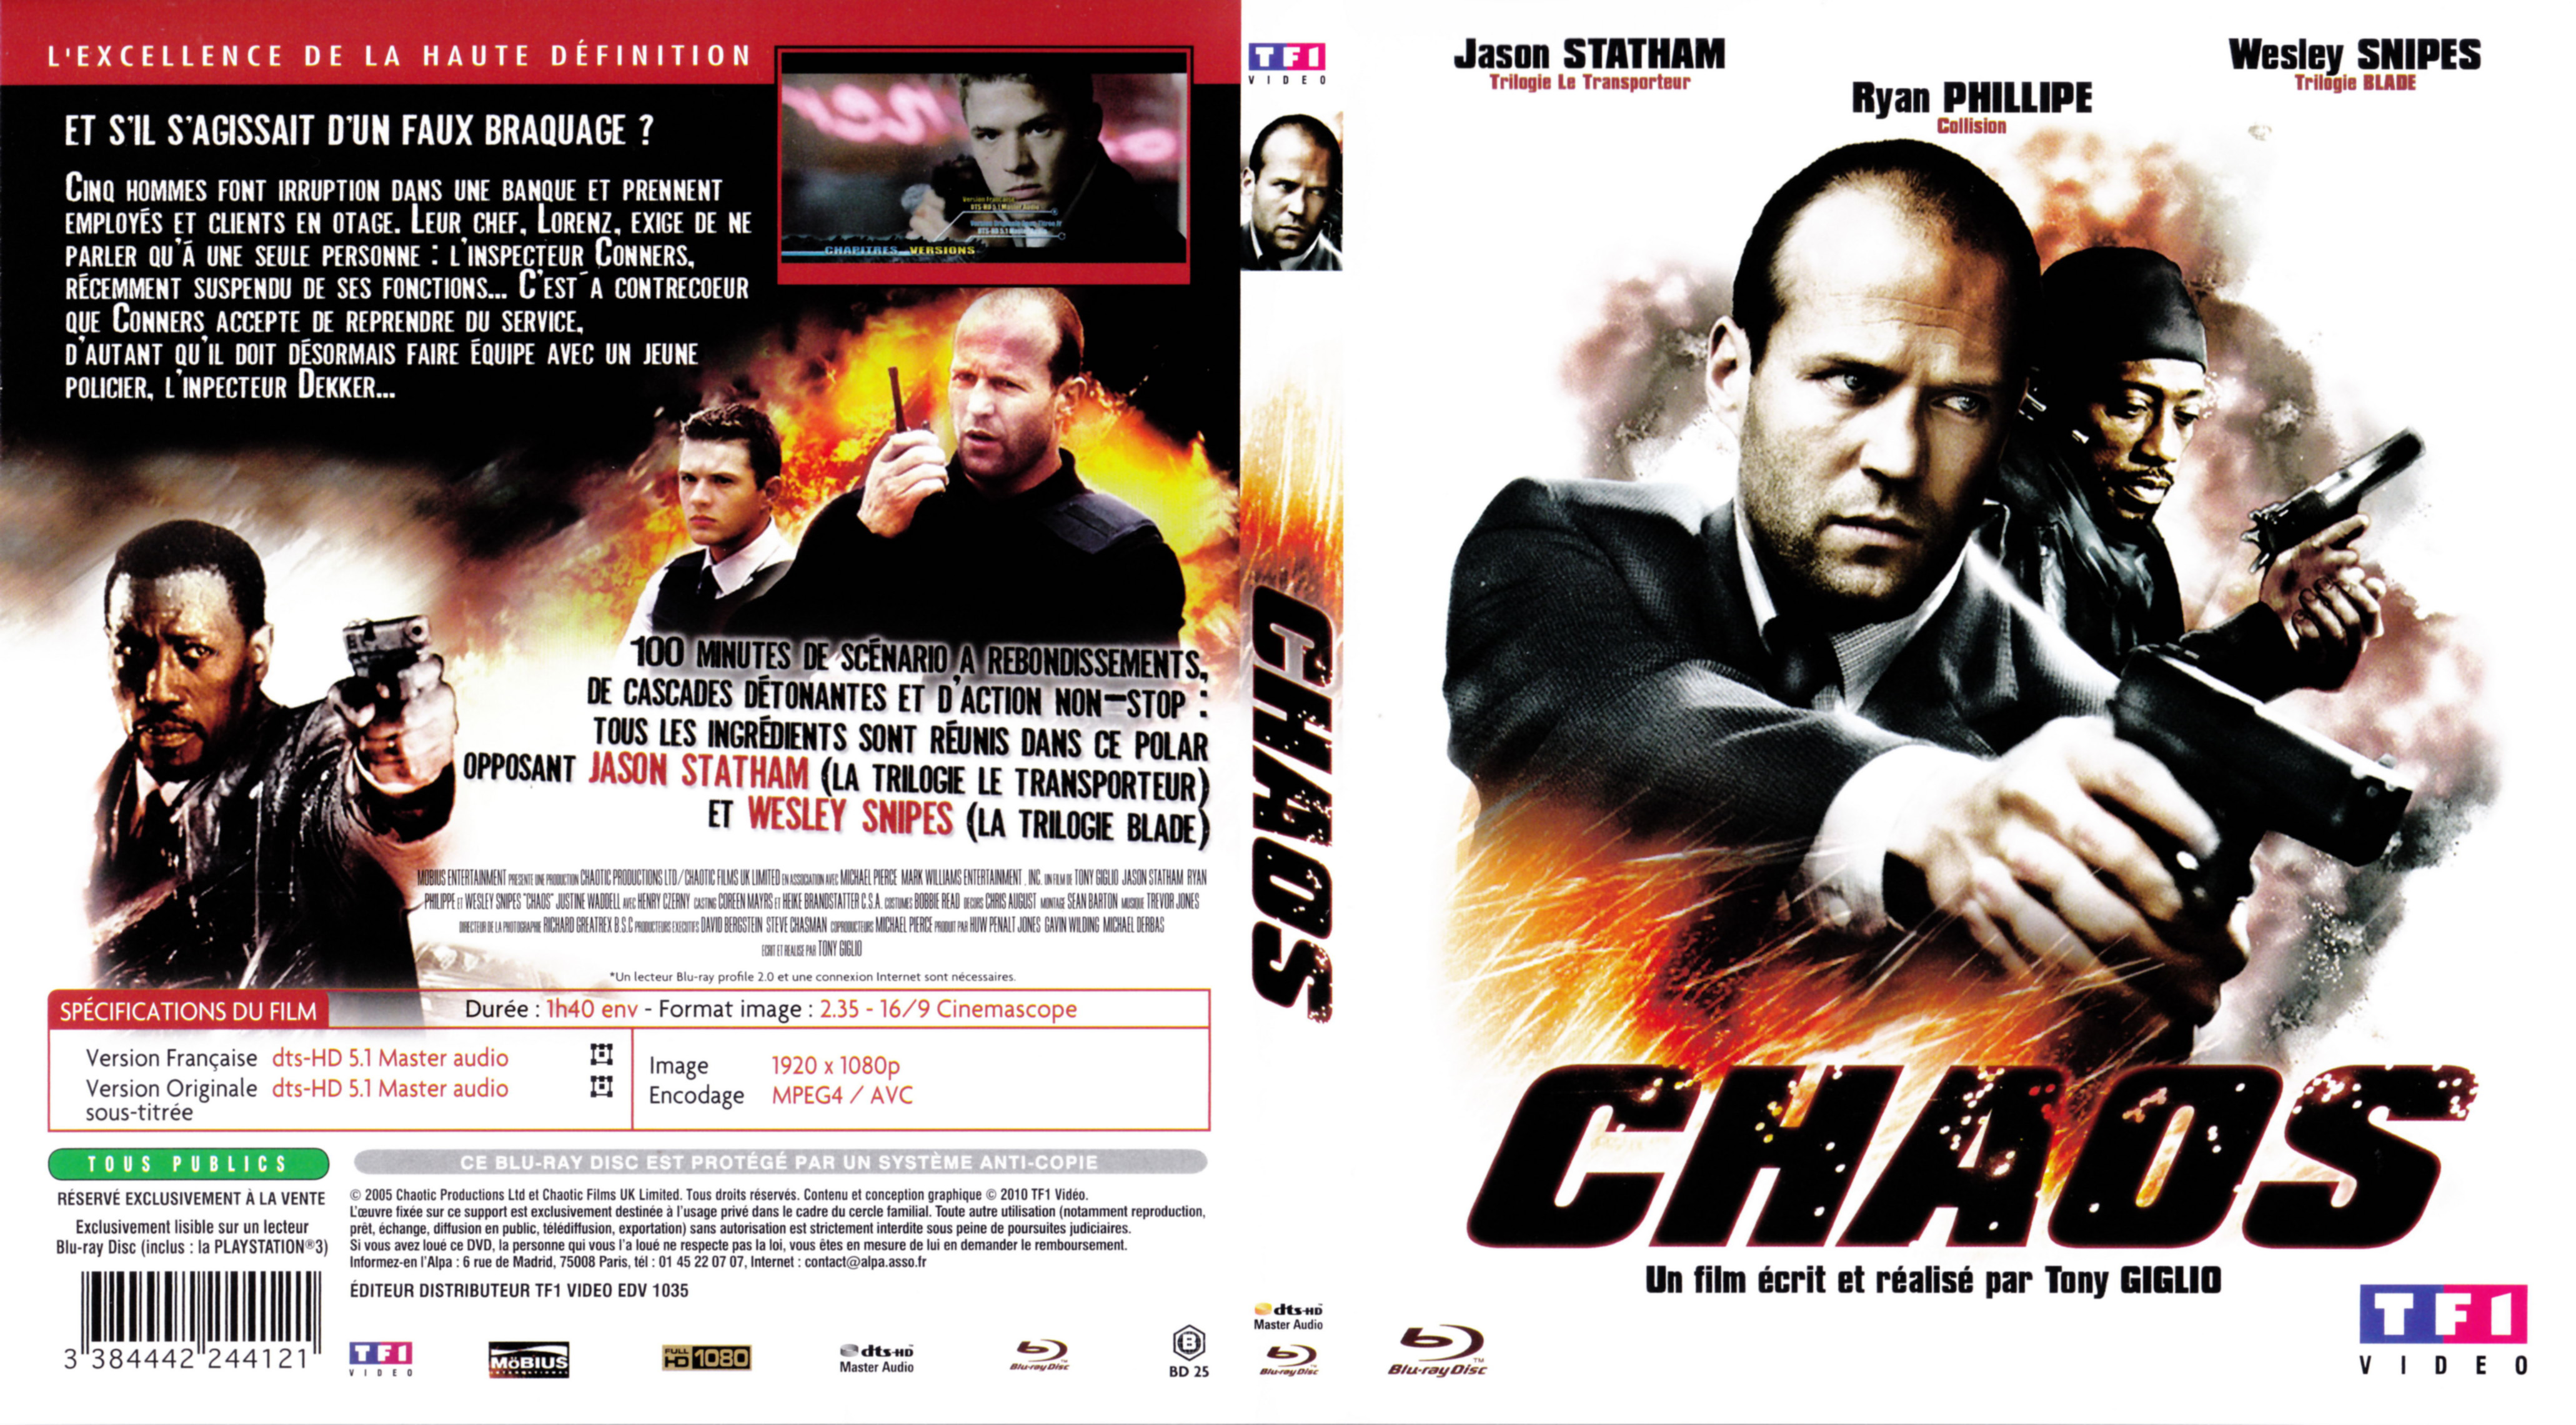 Jaquette DVD Chaos (2005) (BLU-RAY)